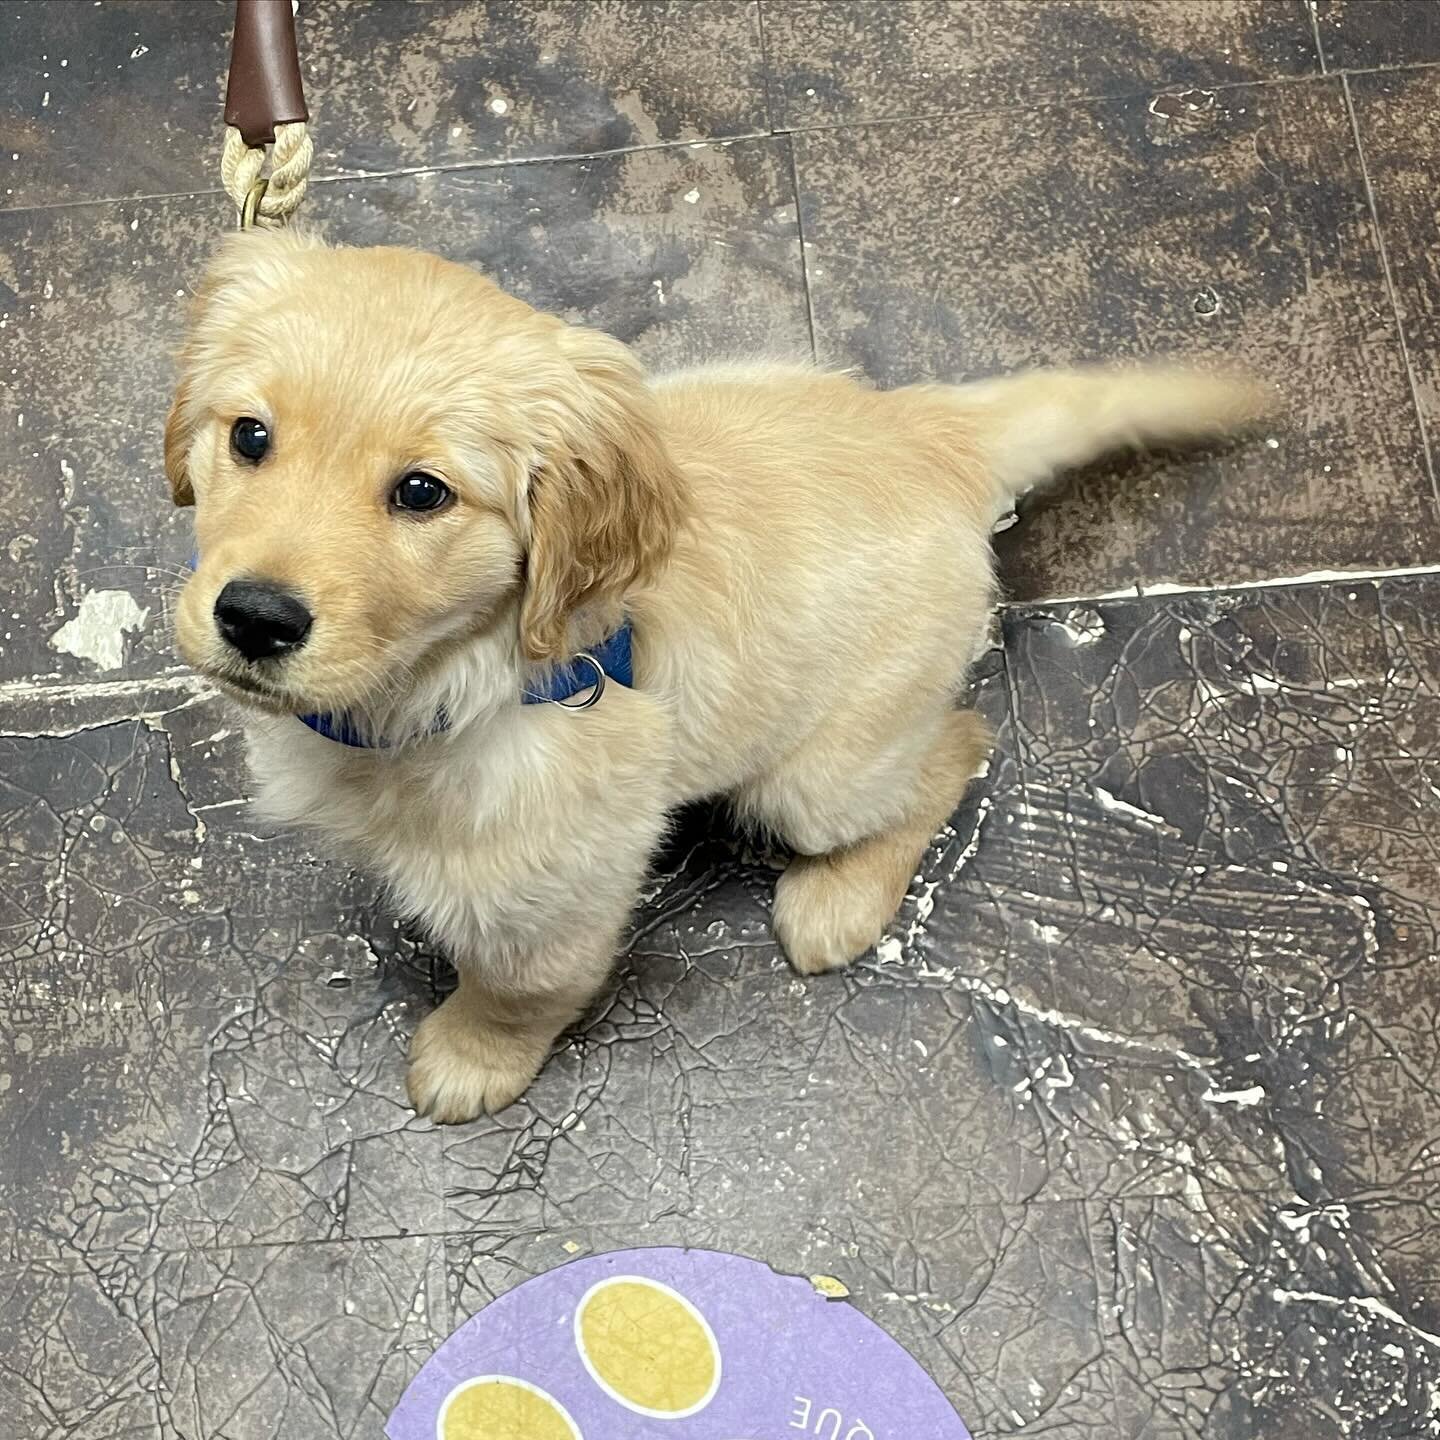 Little Mister Porter came in and saw us today! Feel free to bring your pups in we do professional fittings for harnesses, clothing, collars and more! We love to see em&rsquo;!